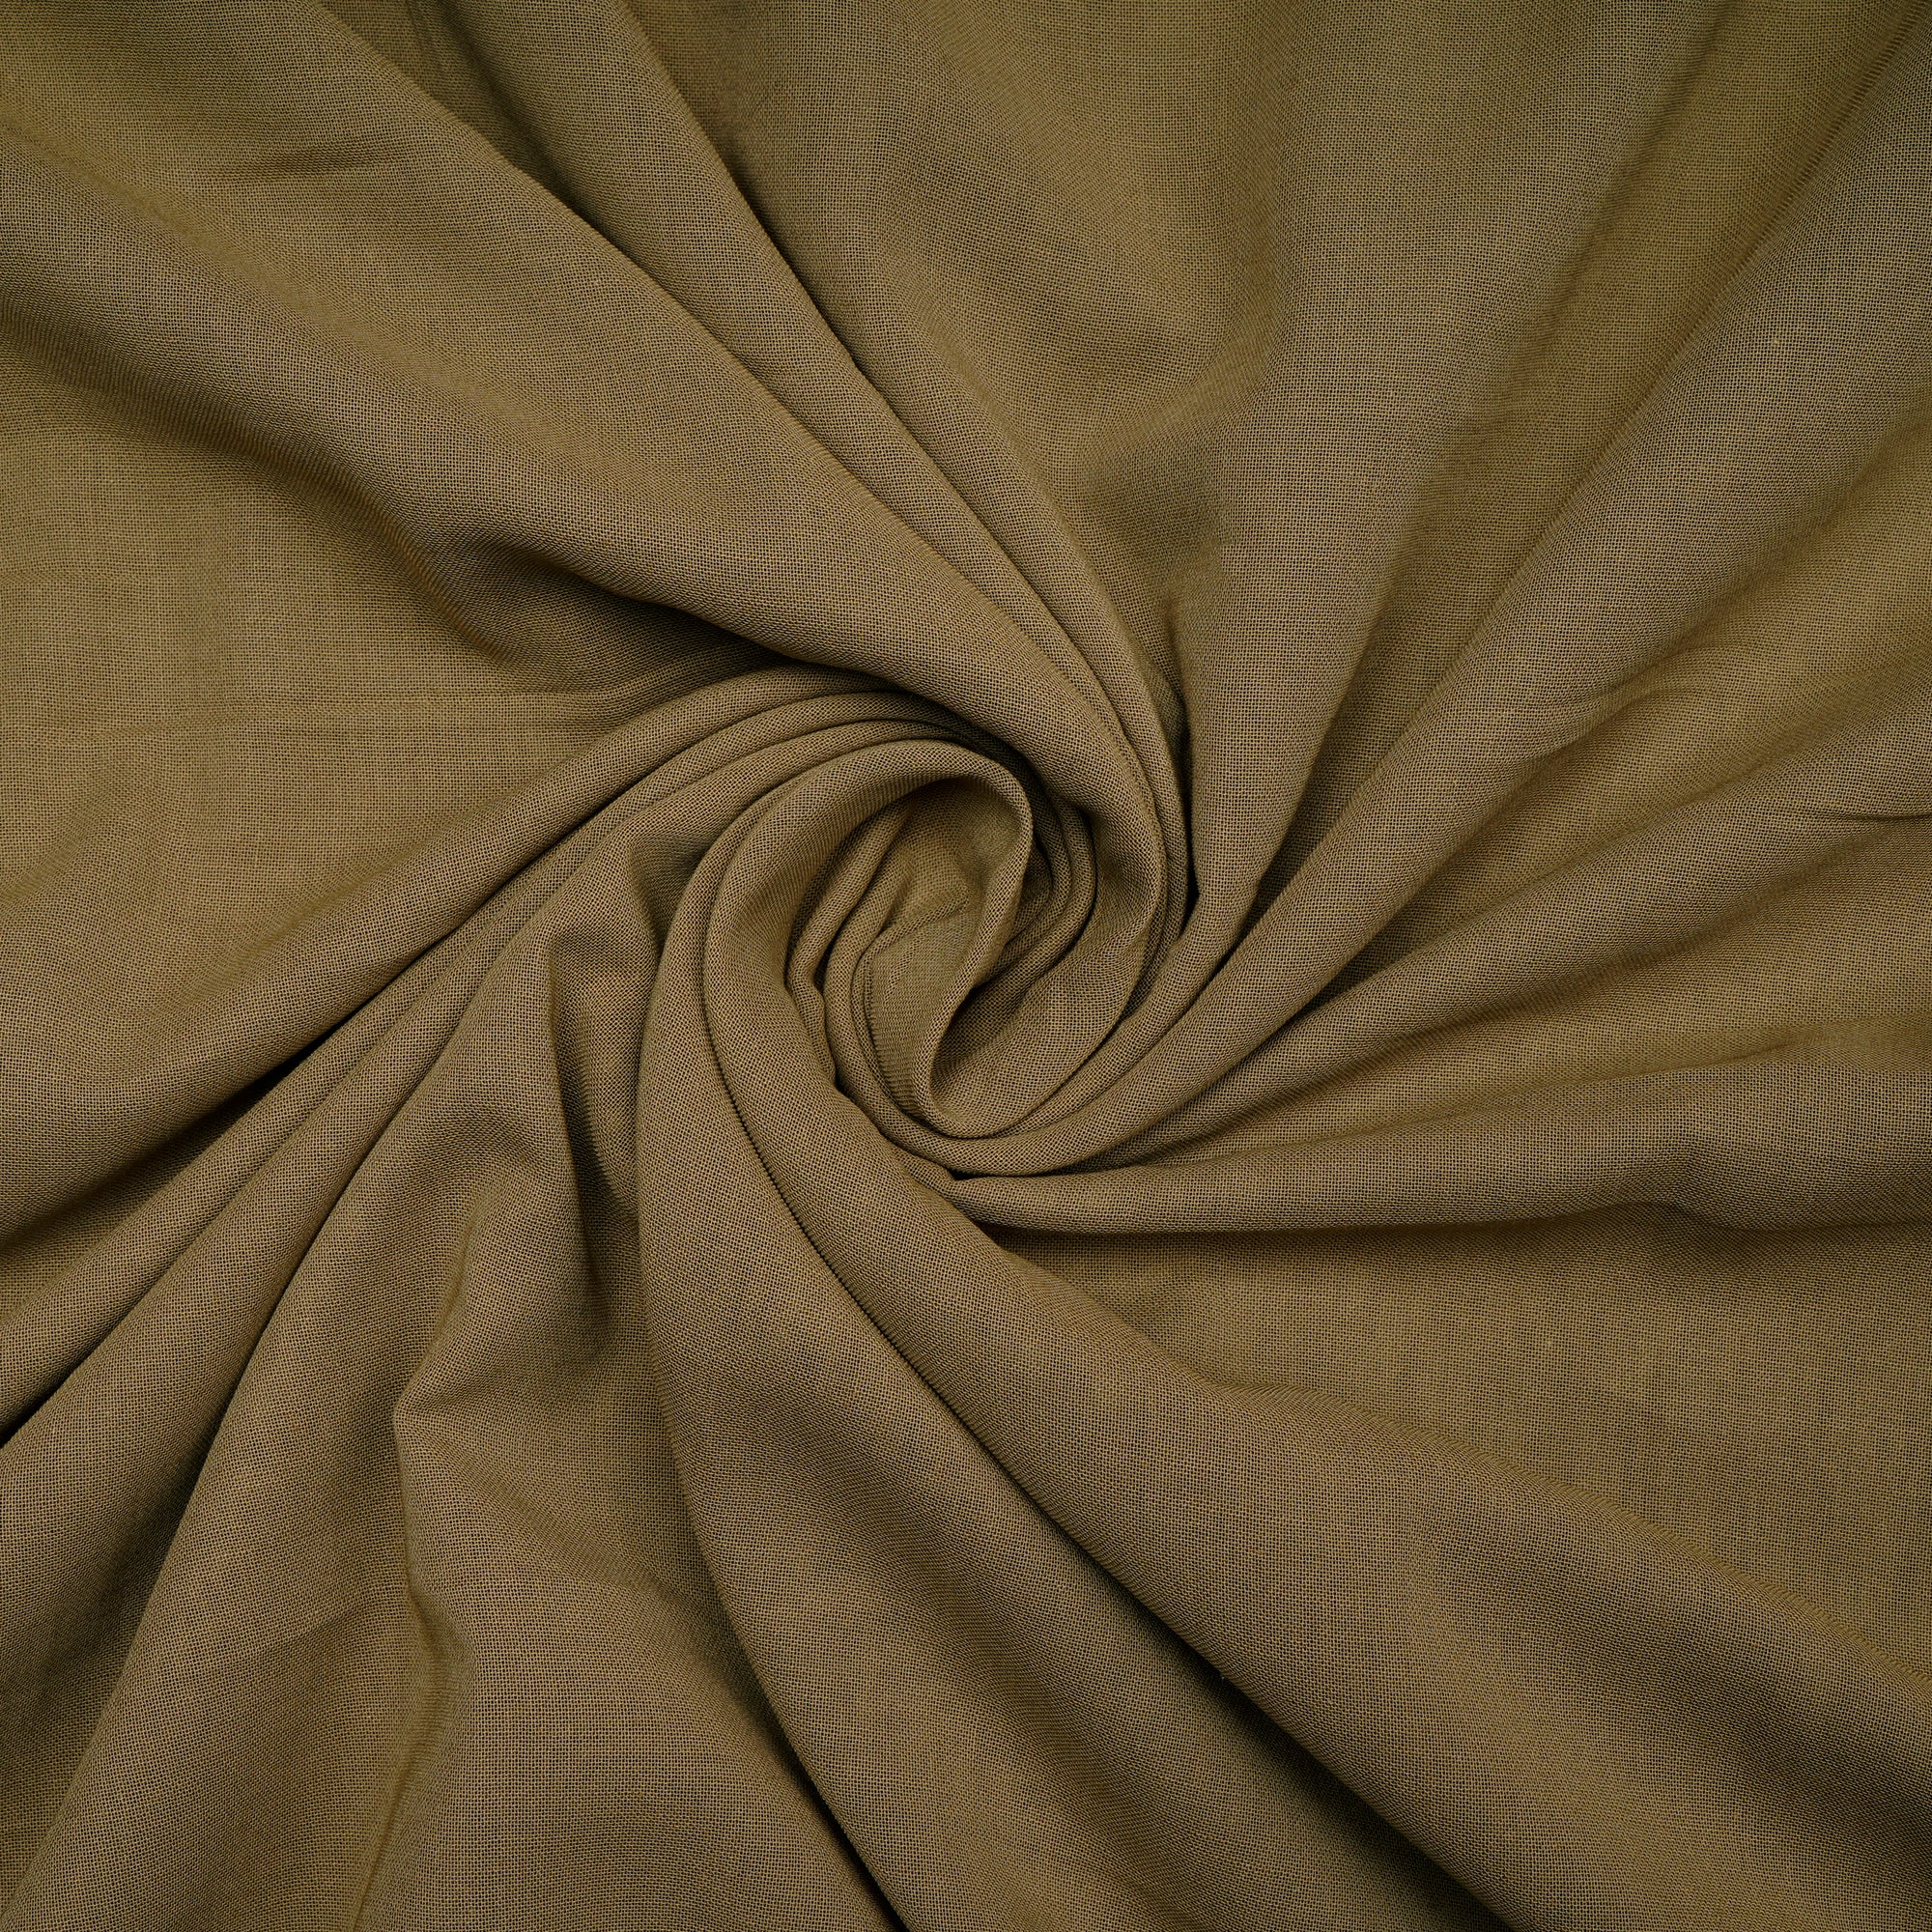 Olive Green Color Piece Dyed High Twist 2x2 Cotton Voile Fabric